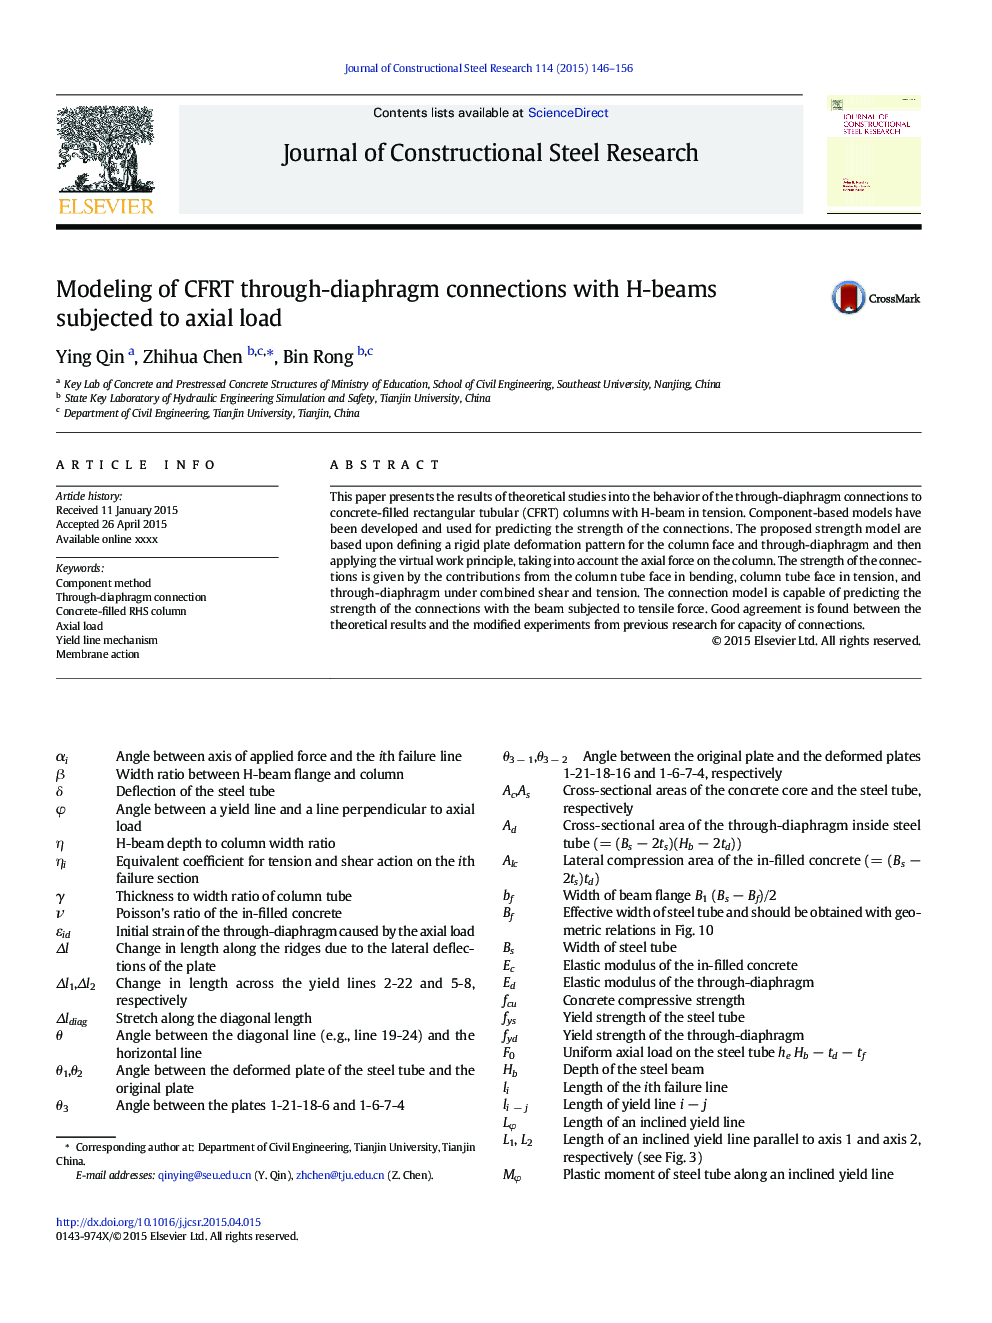 Modeling of CFRT through-diaphragm connections with H-beams subjected to axial load